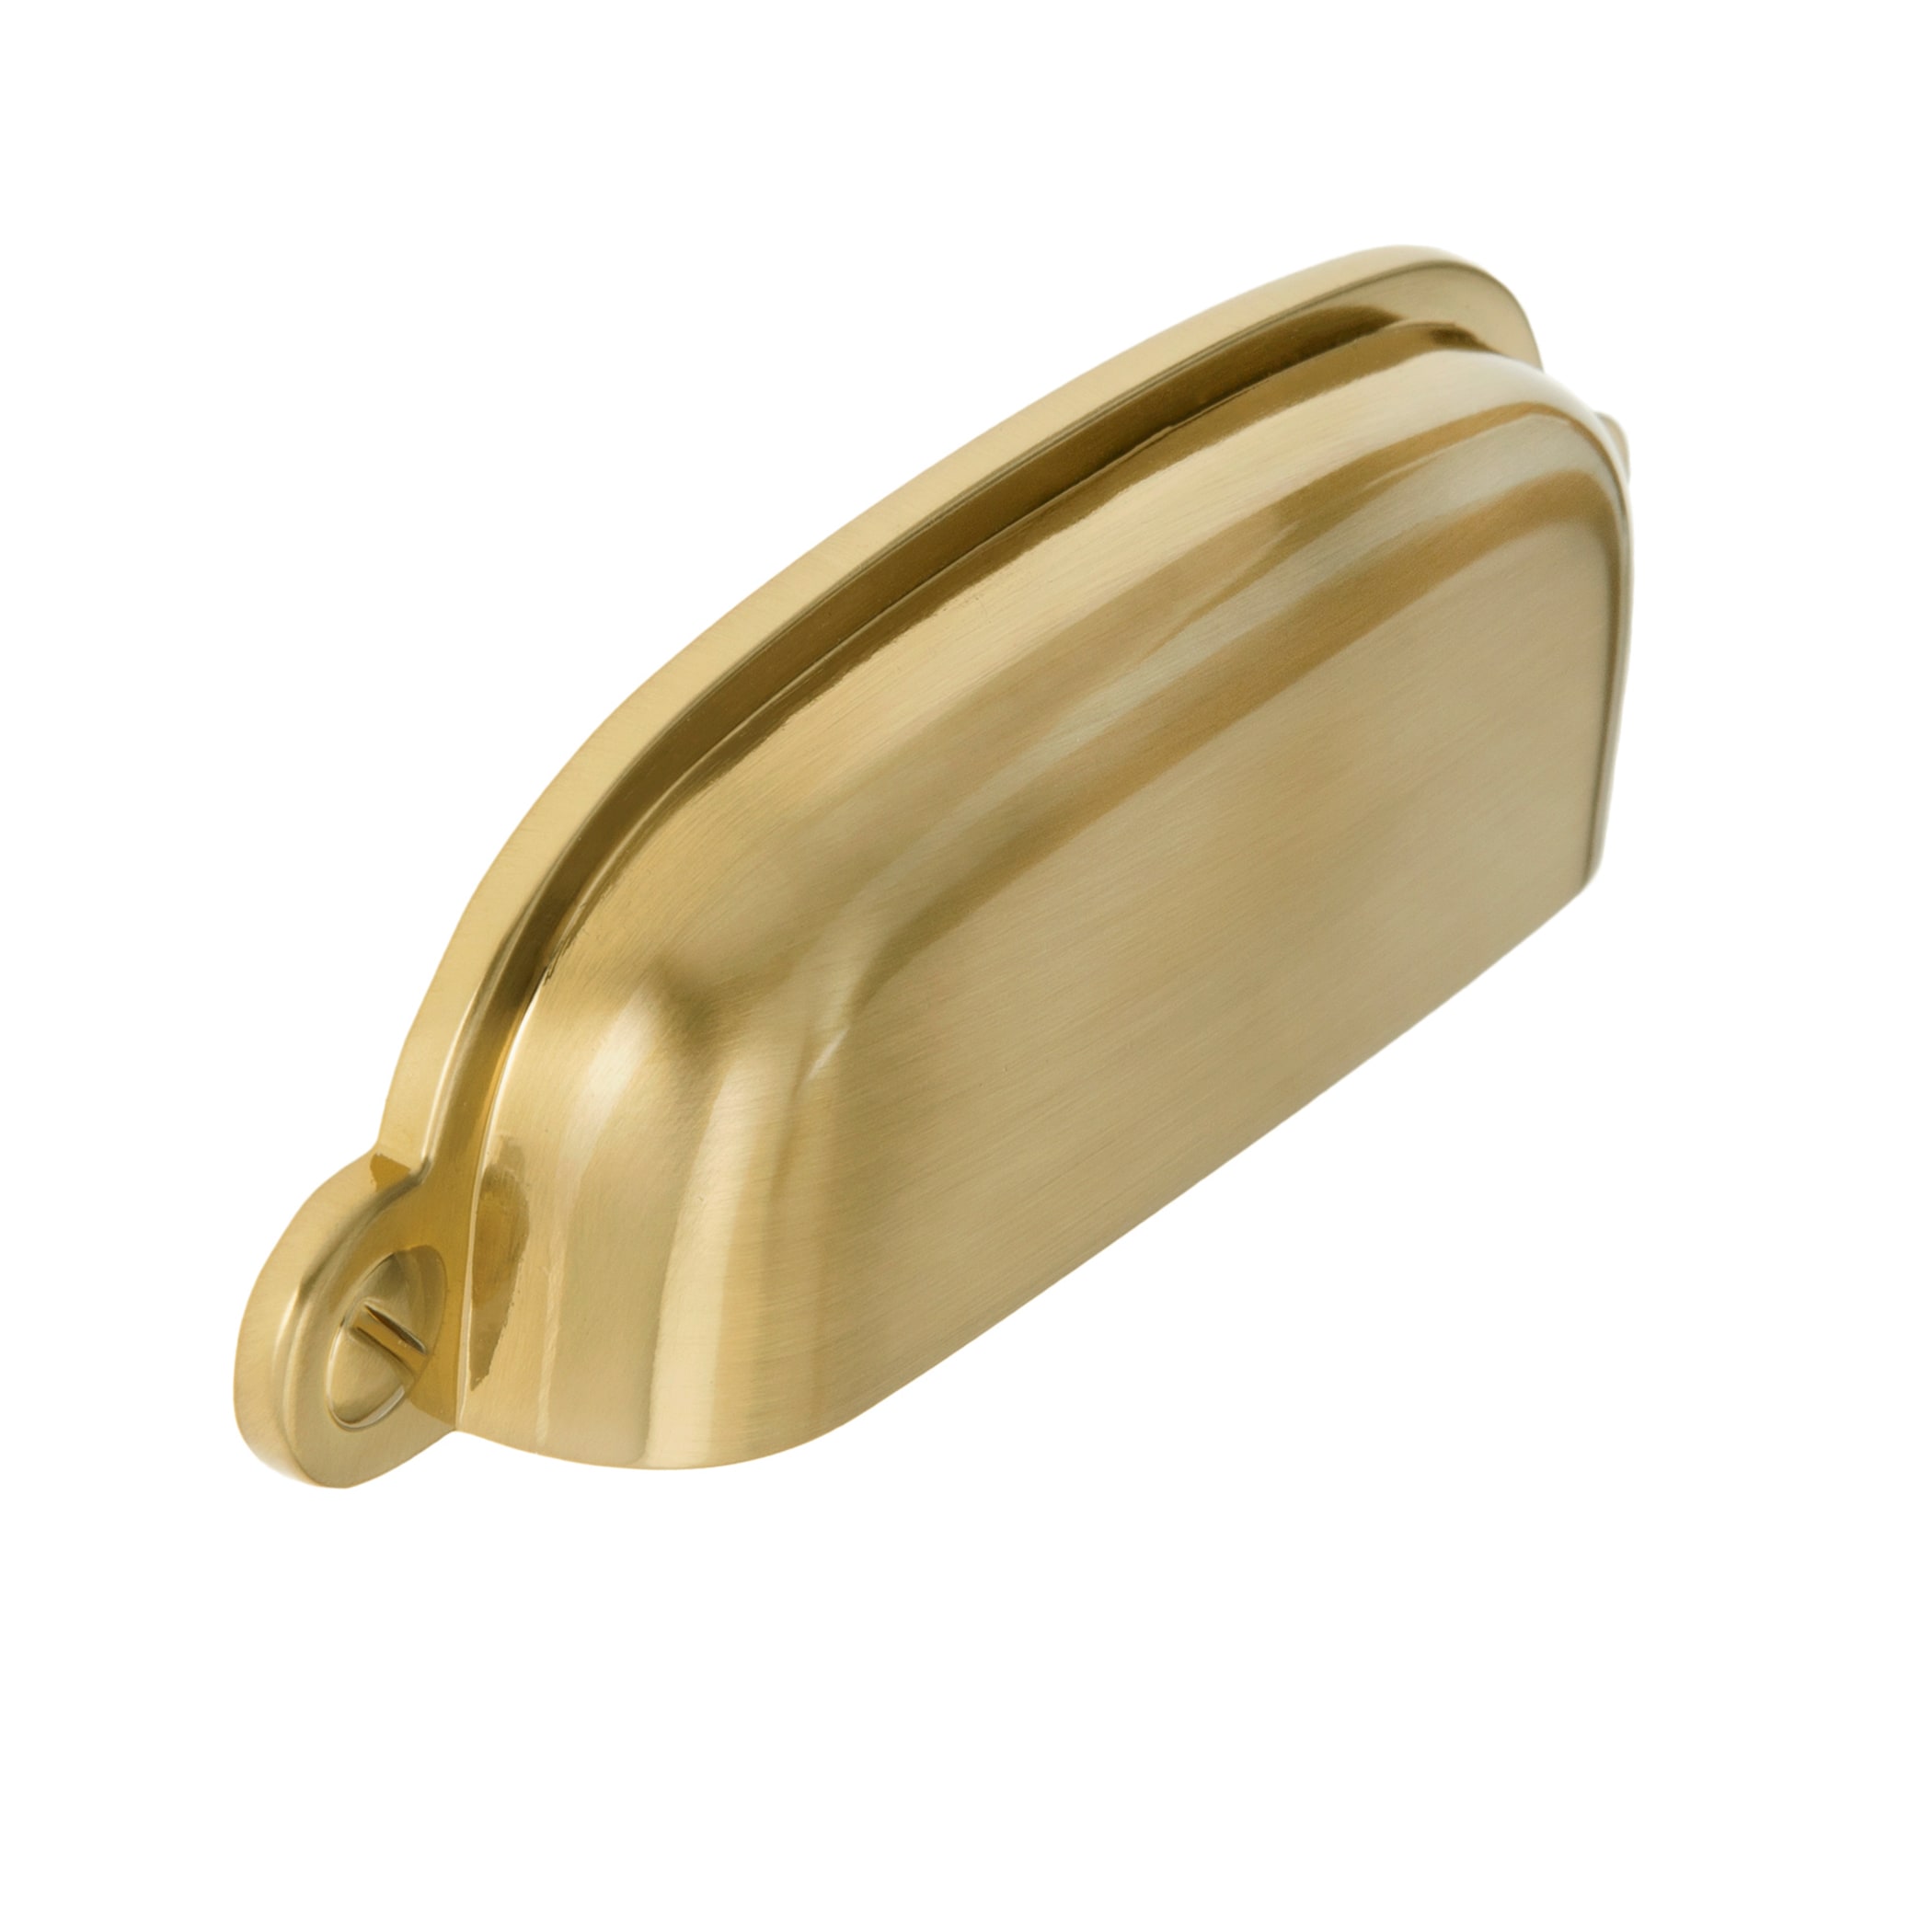 Cup Gold Drawer Pulls at